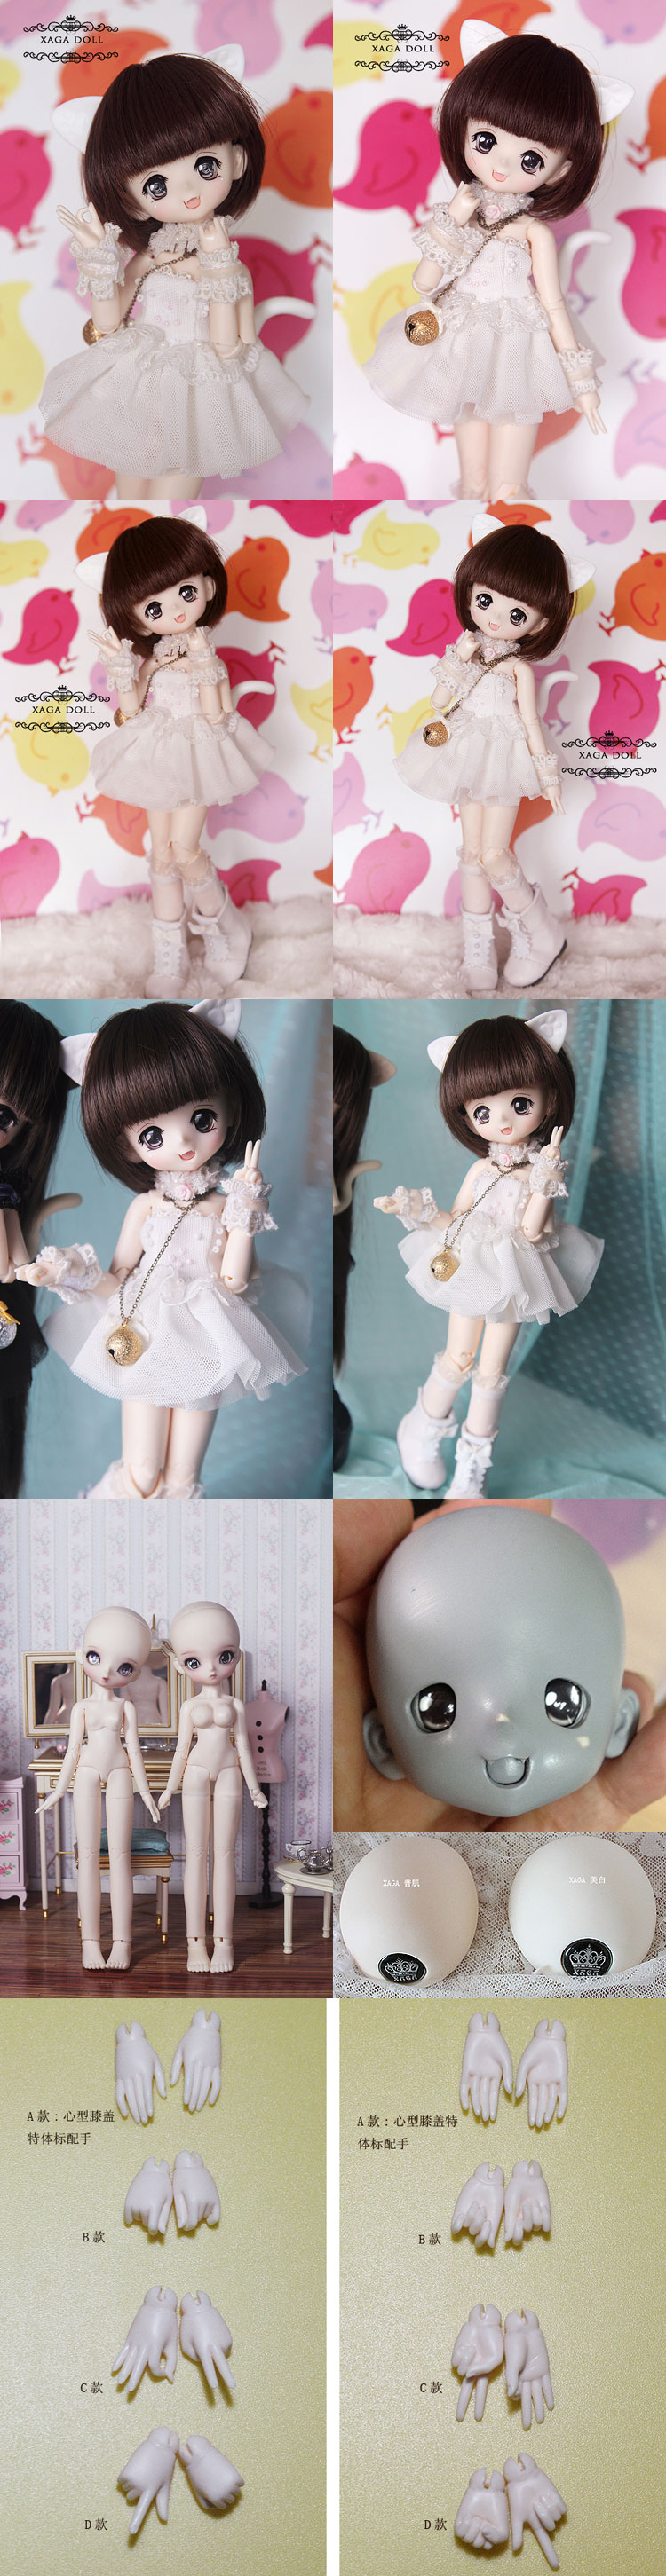 BJD Ximiguo 27cm Ball-Jointed Doll